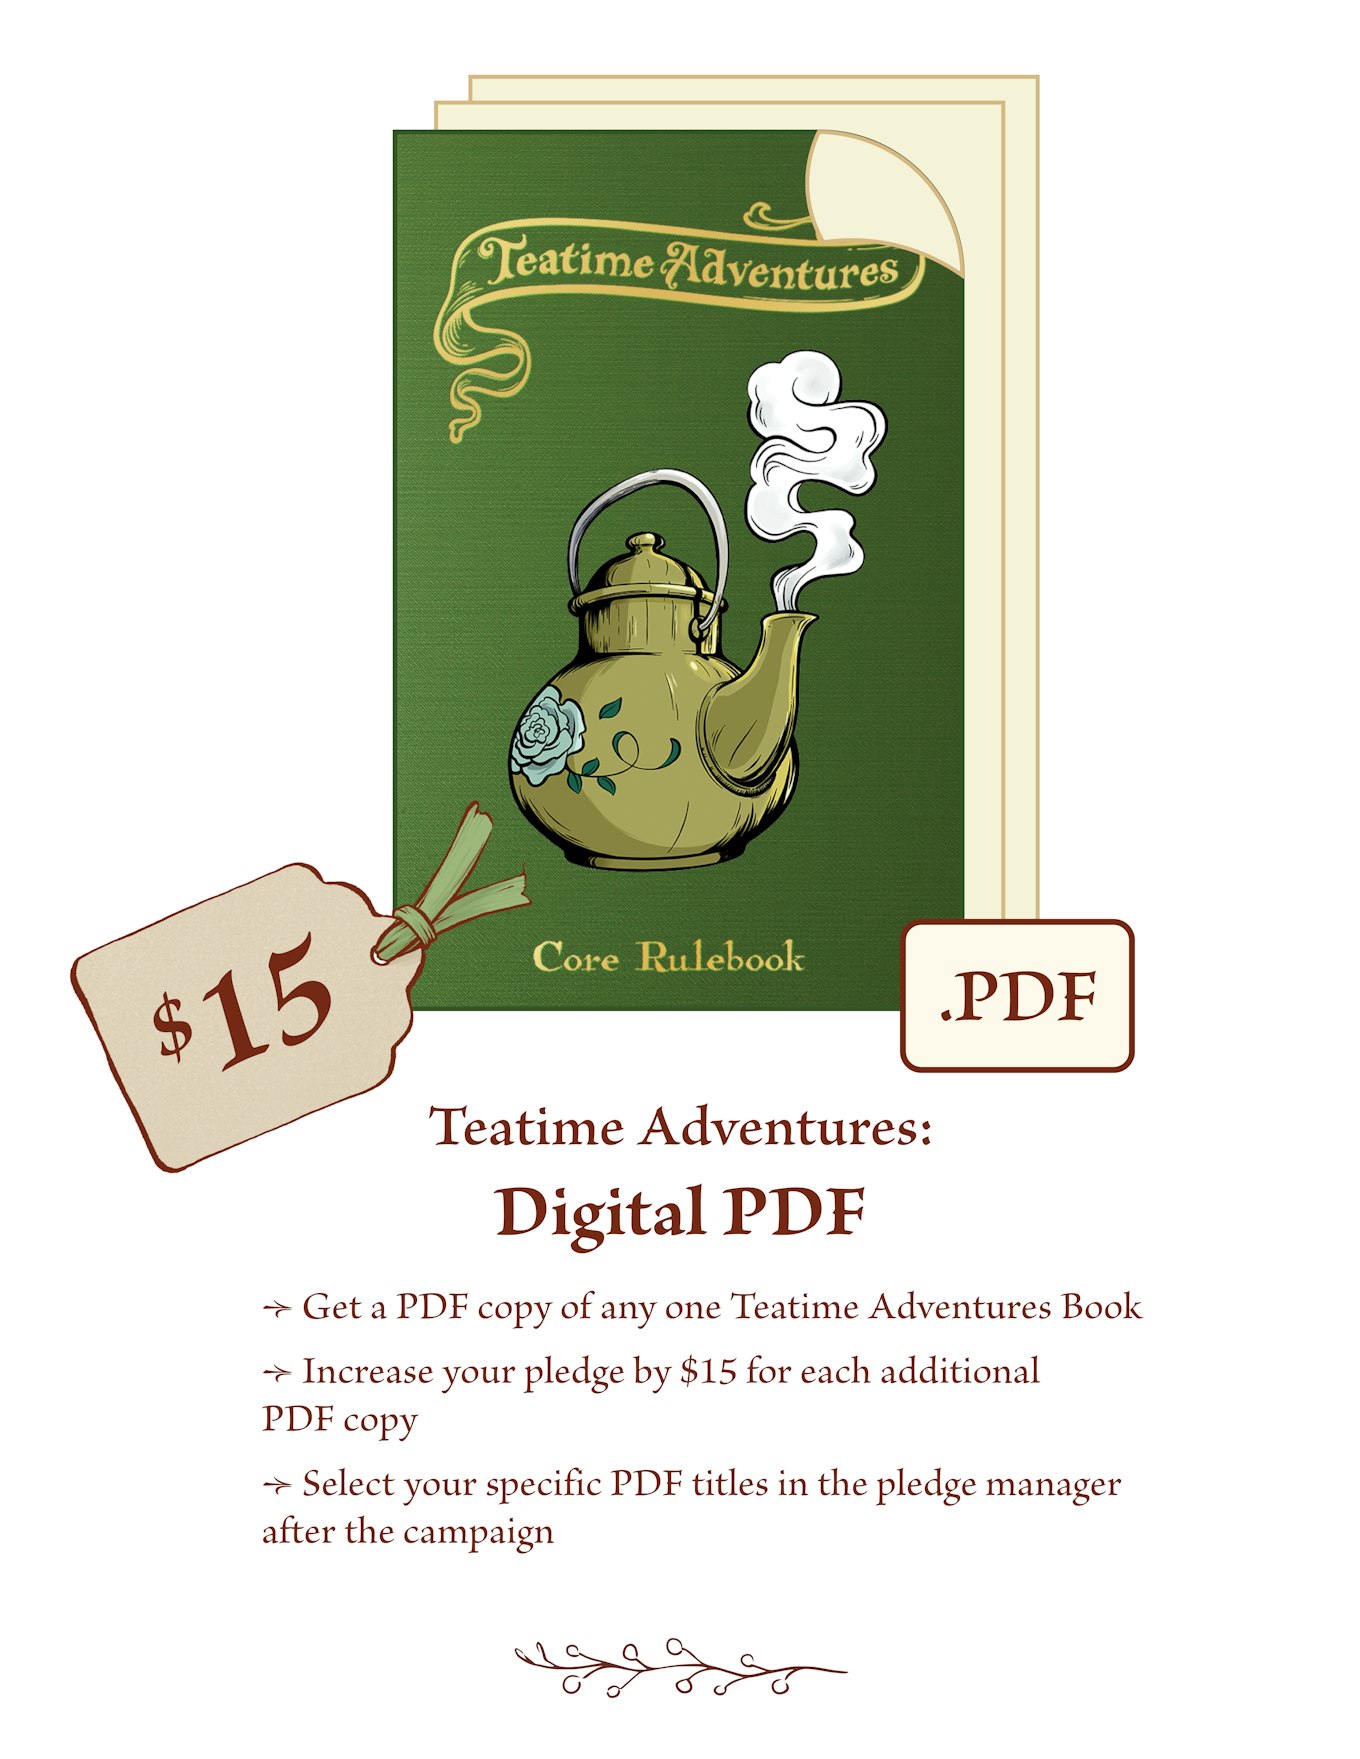 $15 - Teatime Adventures PDF  Get a PDF copy of any one Teatime Adventures Book Increase your pledge by $15 for each additional PDF copy Select your specific PDF titles in the pledge manager after the campaign 